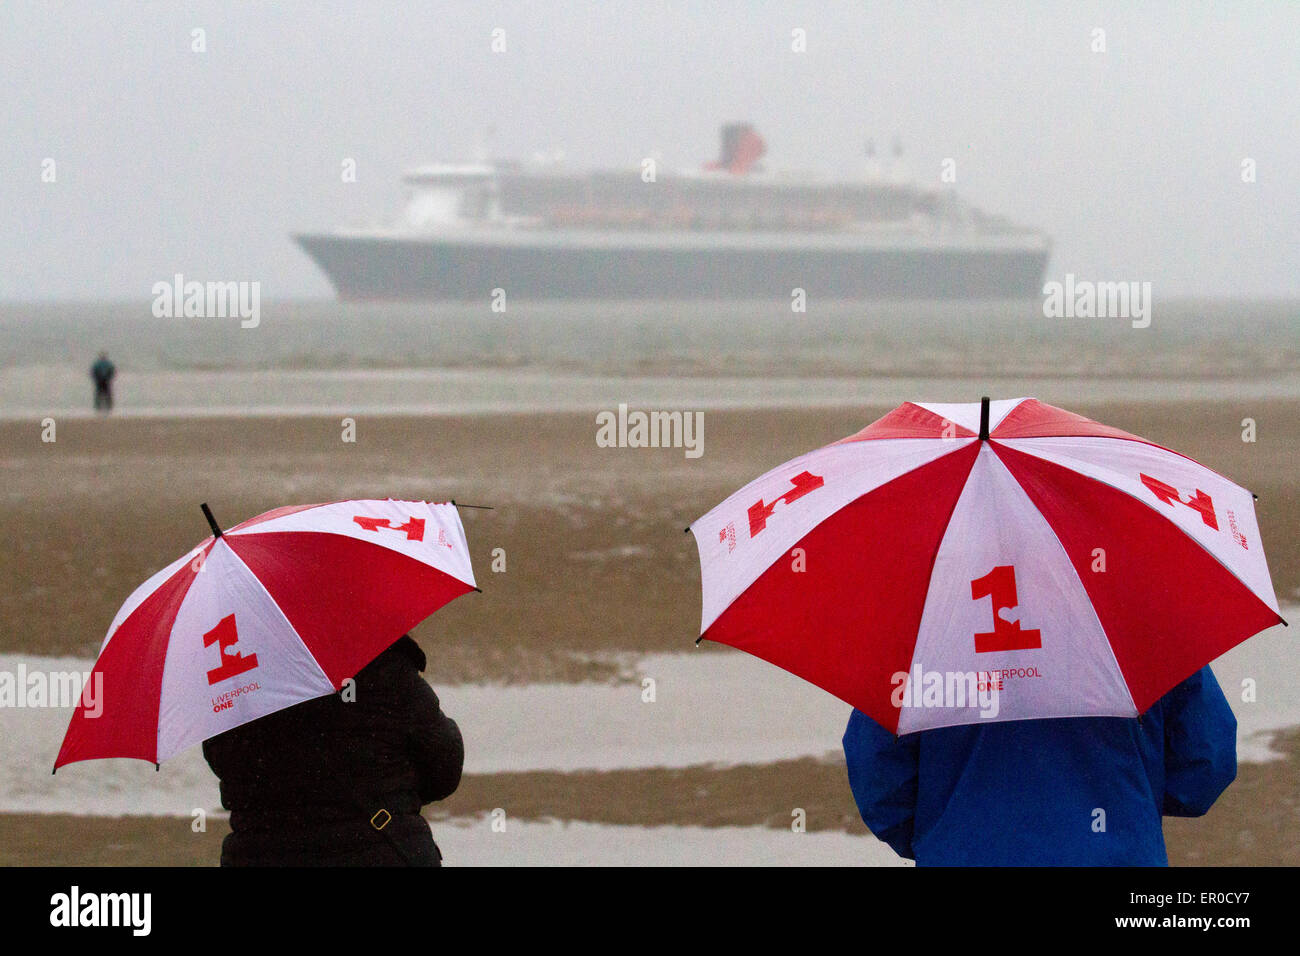 Golf umbrella, giant umbrellas in Liverpool, Merseyside, UK 24th May, 2015.  Cunard Queen Mary's arrival at dawn off Crosby Beach heralding the start of a stunning Three Queens celebration in the city. The flagship is the first of the company's three of luxury liners to arrive at Liverpool ahead of this Monday's celebrations which are expected to attract up to a million spectators. She will be joined by her two sister ships Queen Victoria and Queen Elizabeth in the following 24 hours for a sail past the city’s own three Queens to mark Cunard’s 175th birthday. Stock Photo